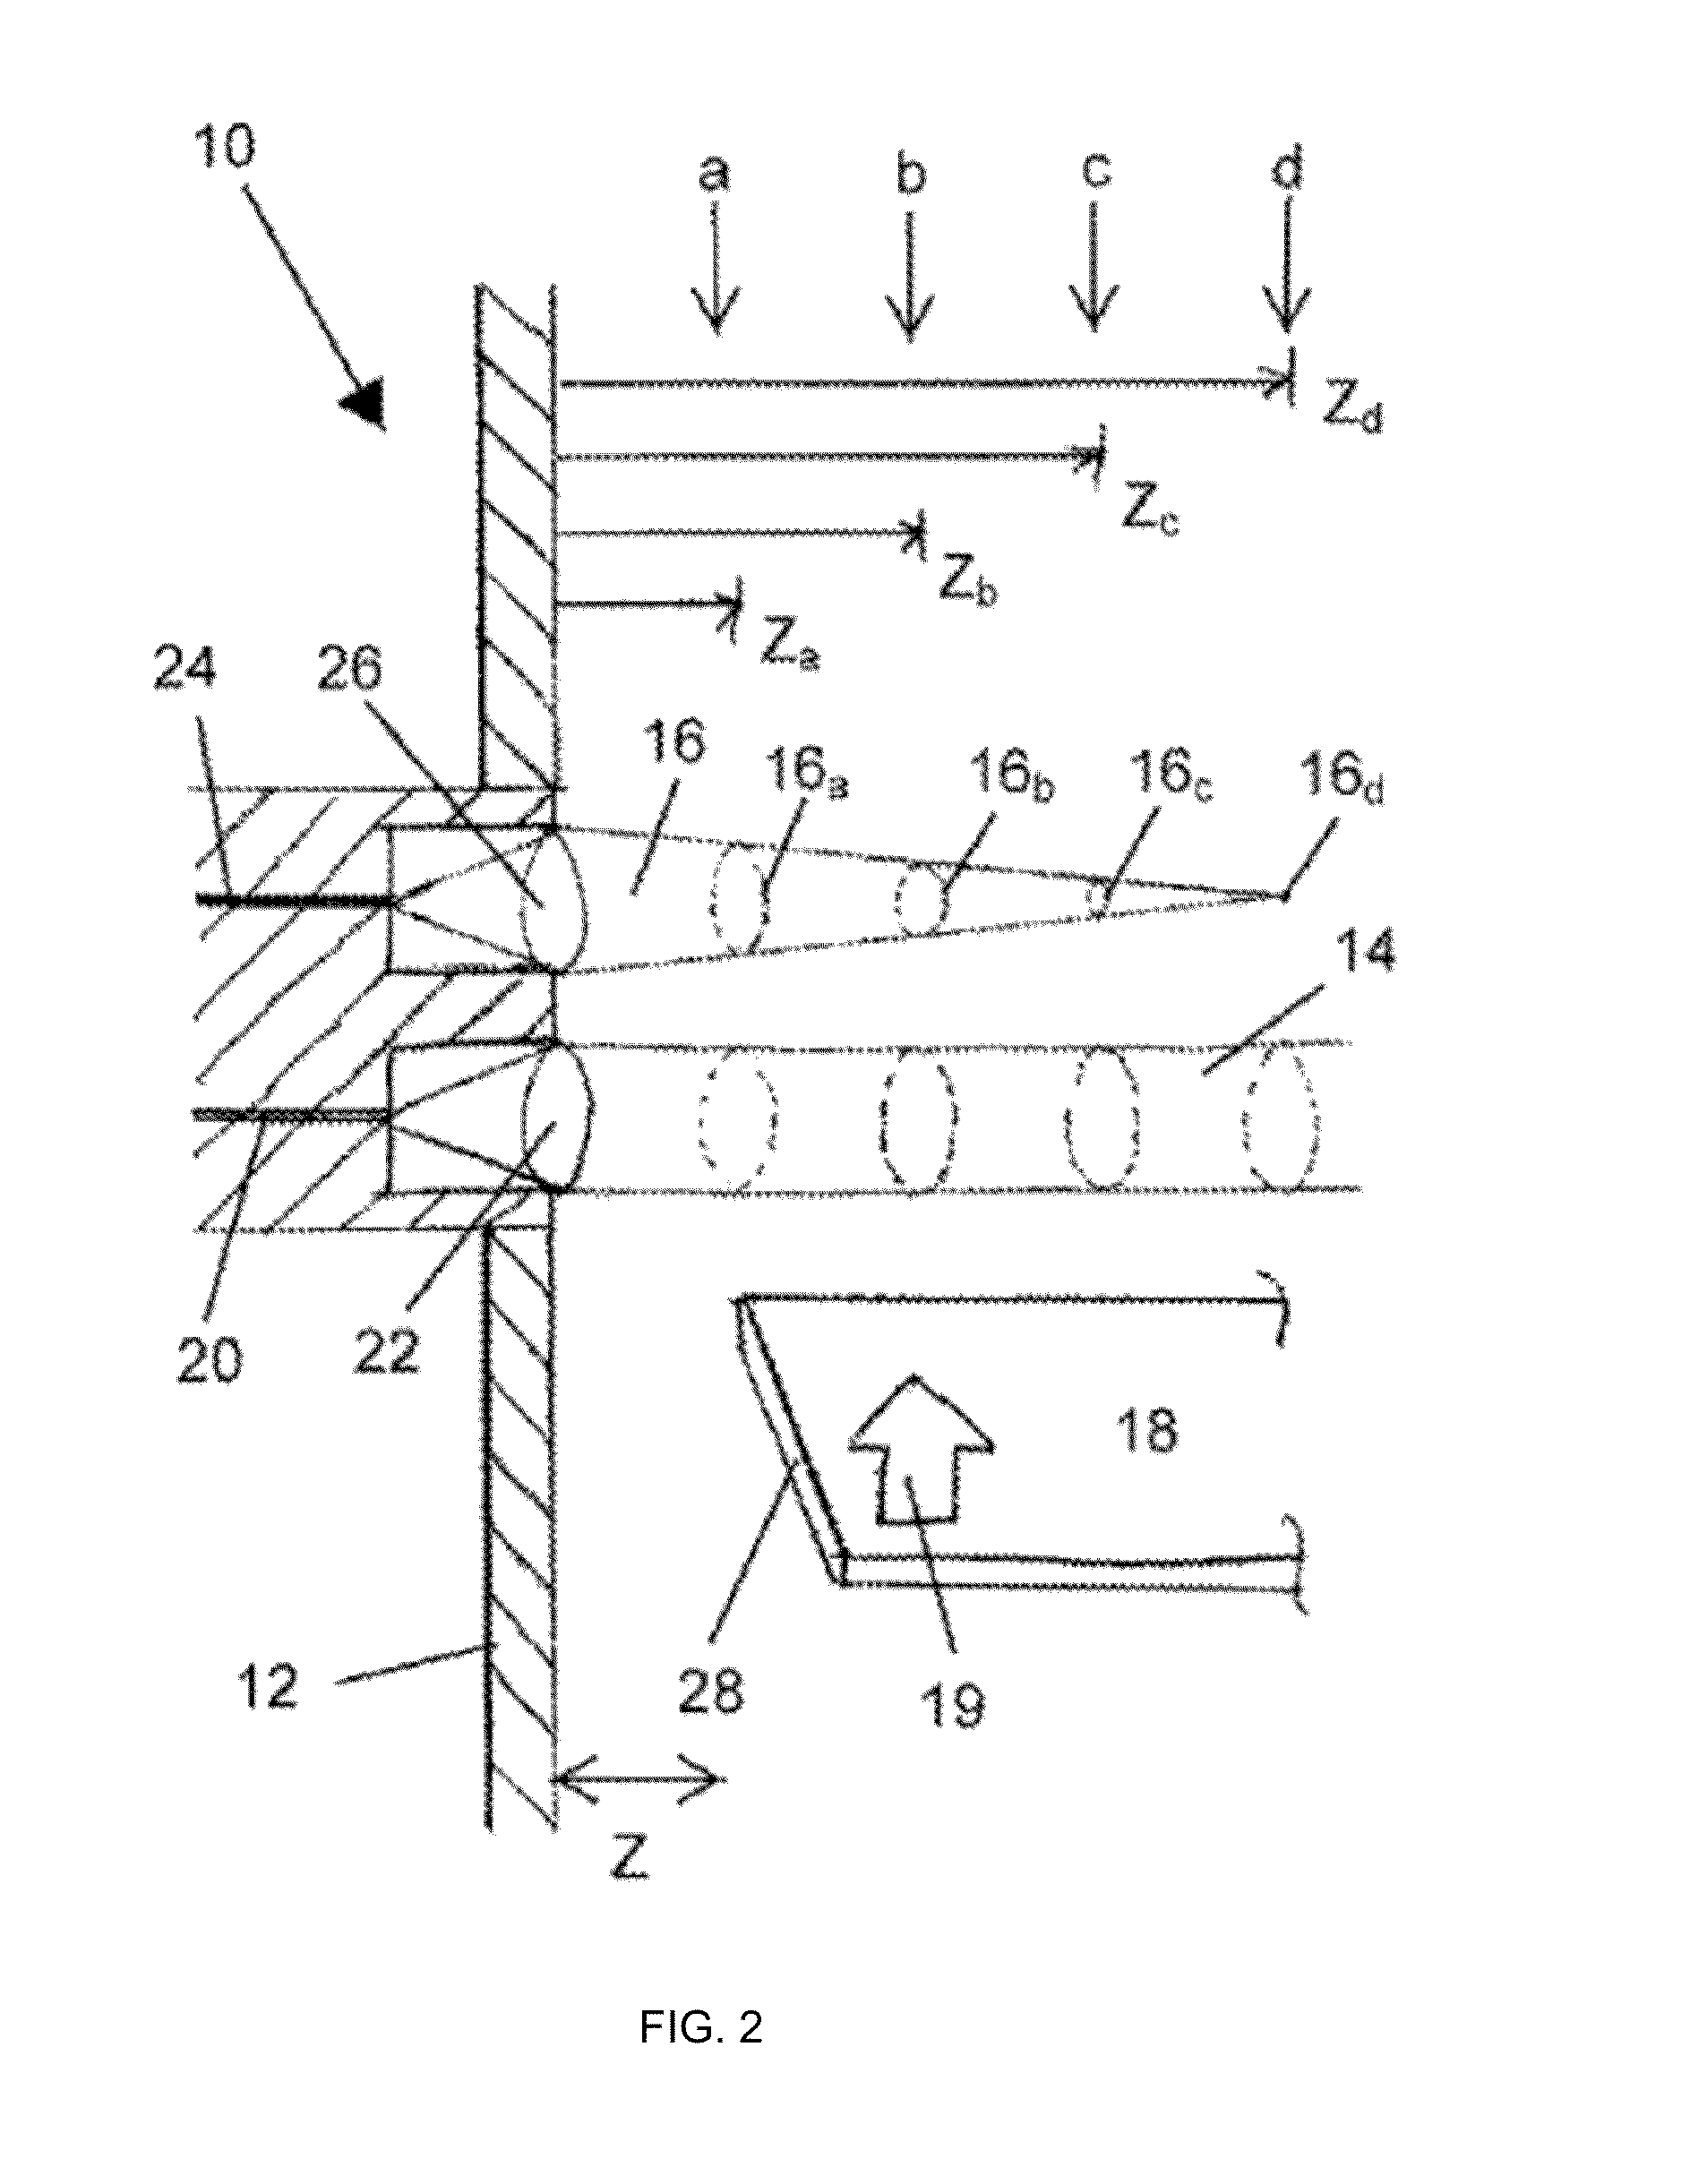 Method for Detecting Foreign Object Damage in Turbomachinery